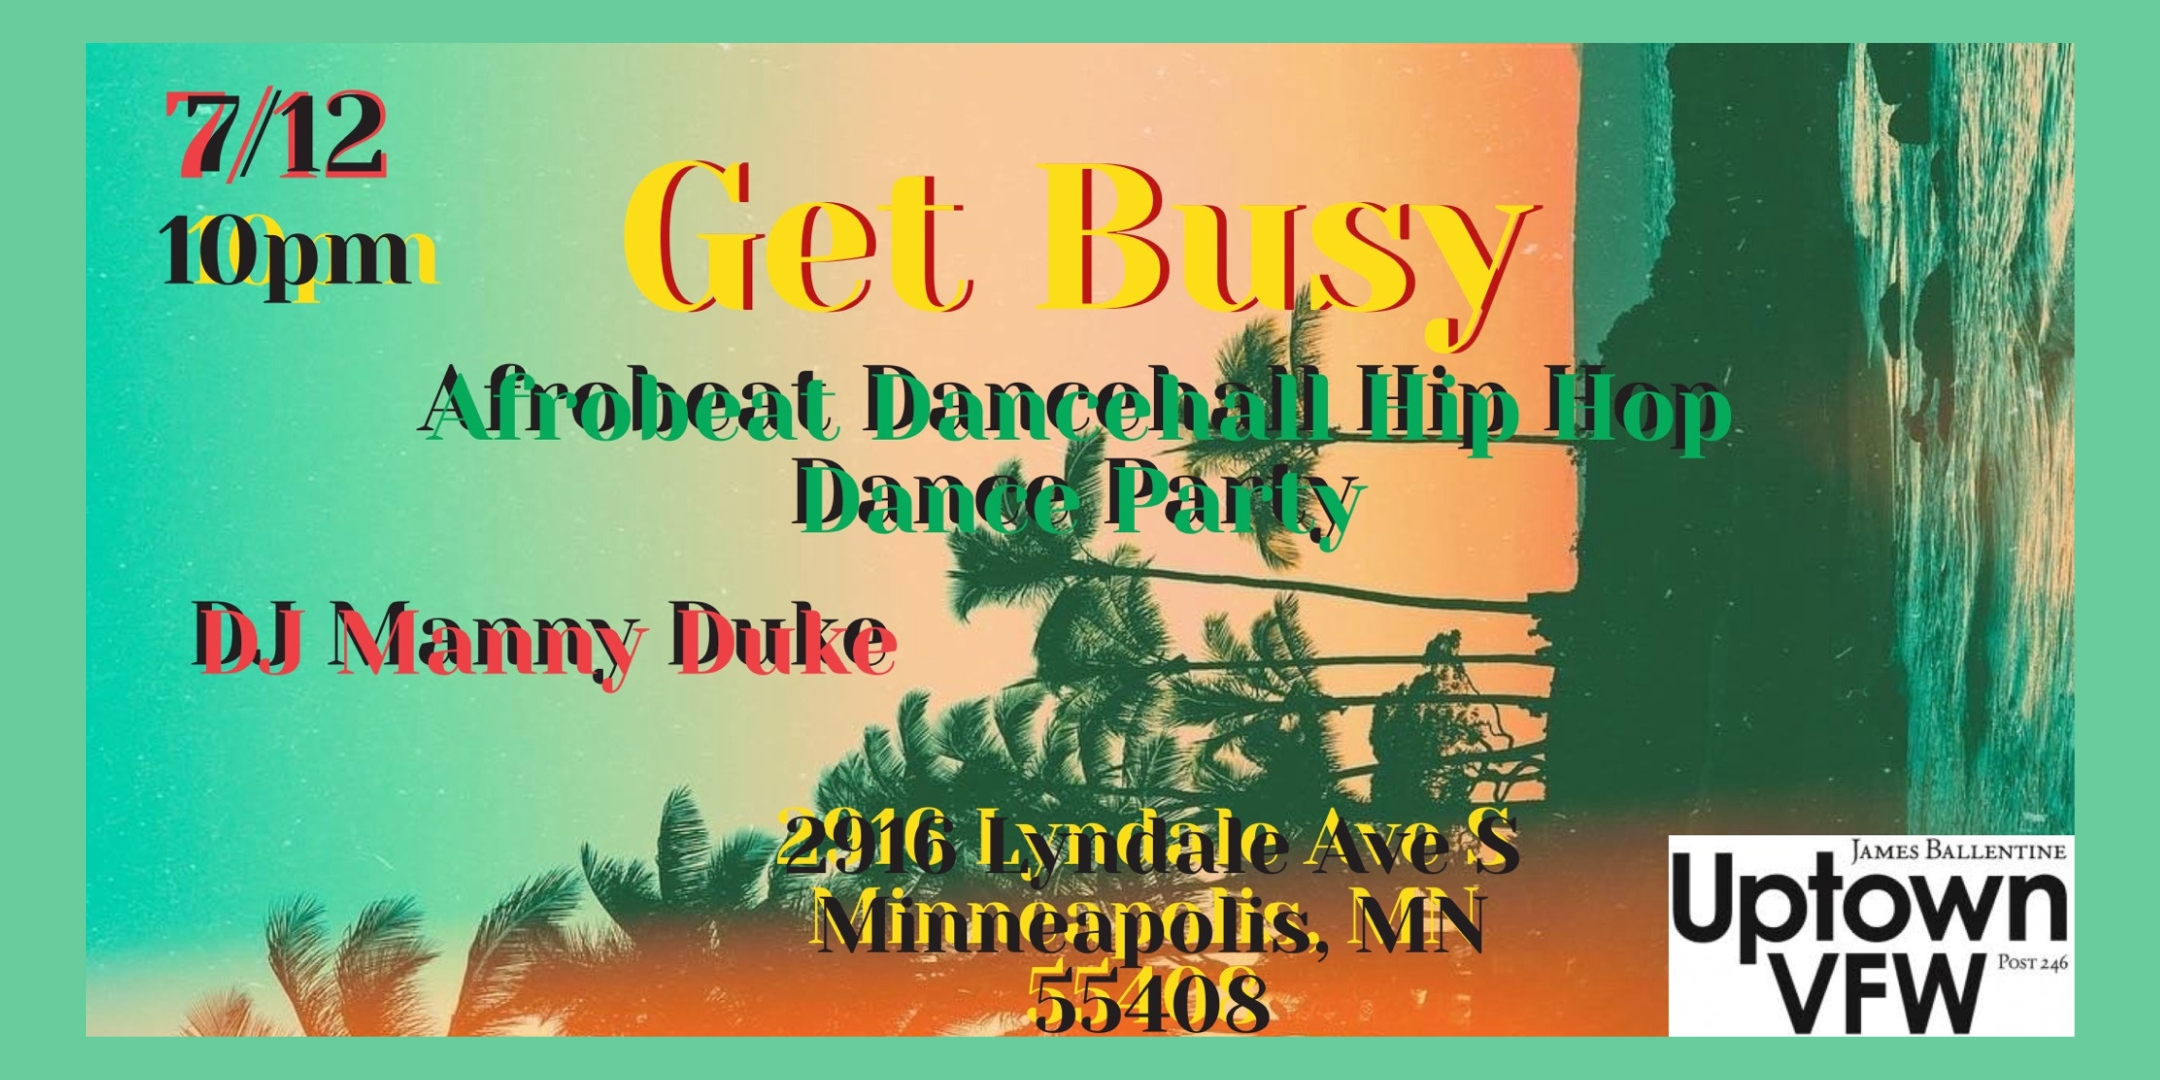 DJ Manny Duke Presents Get Busy An Afrobeat and Reggae Dance Party Friday, July 12 James Ballentine "Uptown" VFW Post 246 Doors 10:00pm :: Music 10:00pm :: 21+ GA $5 ADV / $10 DOS NO REFUNDS Ticket On-Sale Now